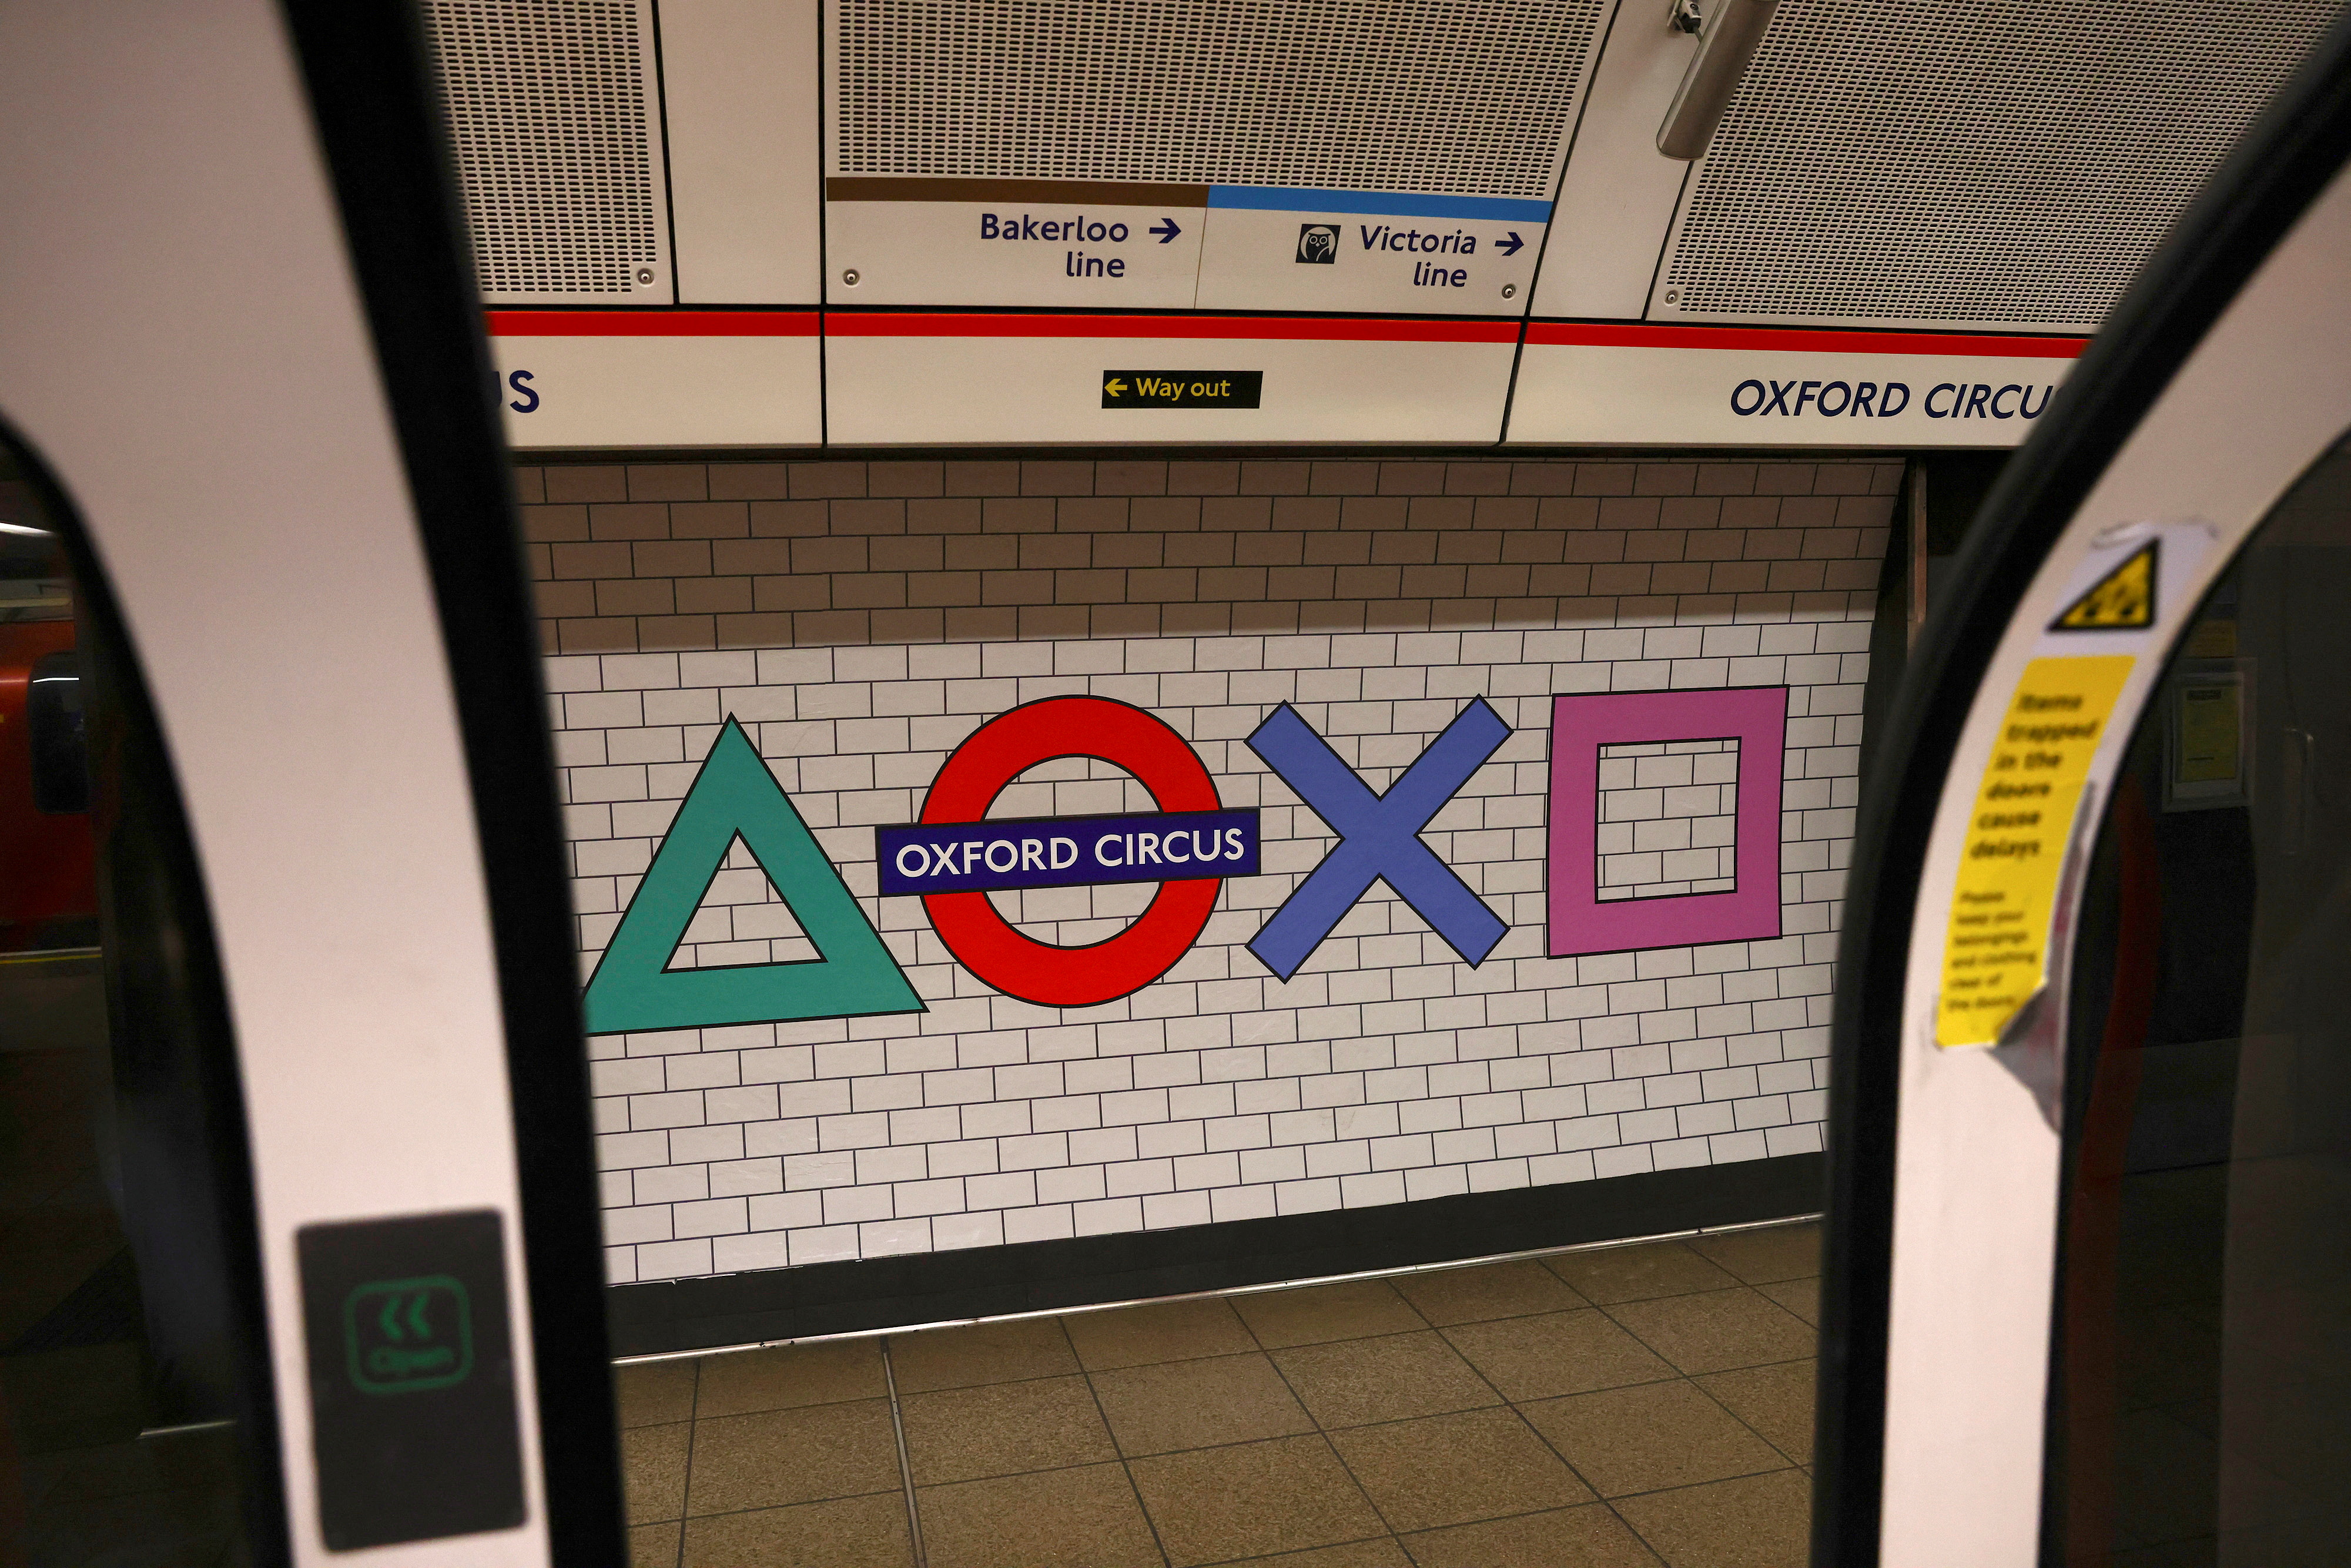 Sony Playstation 5 branding is displayed replacing the traditional Oxford Circus underground logo on the platform of the tube station, in London